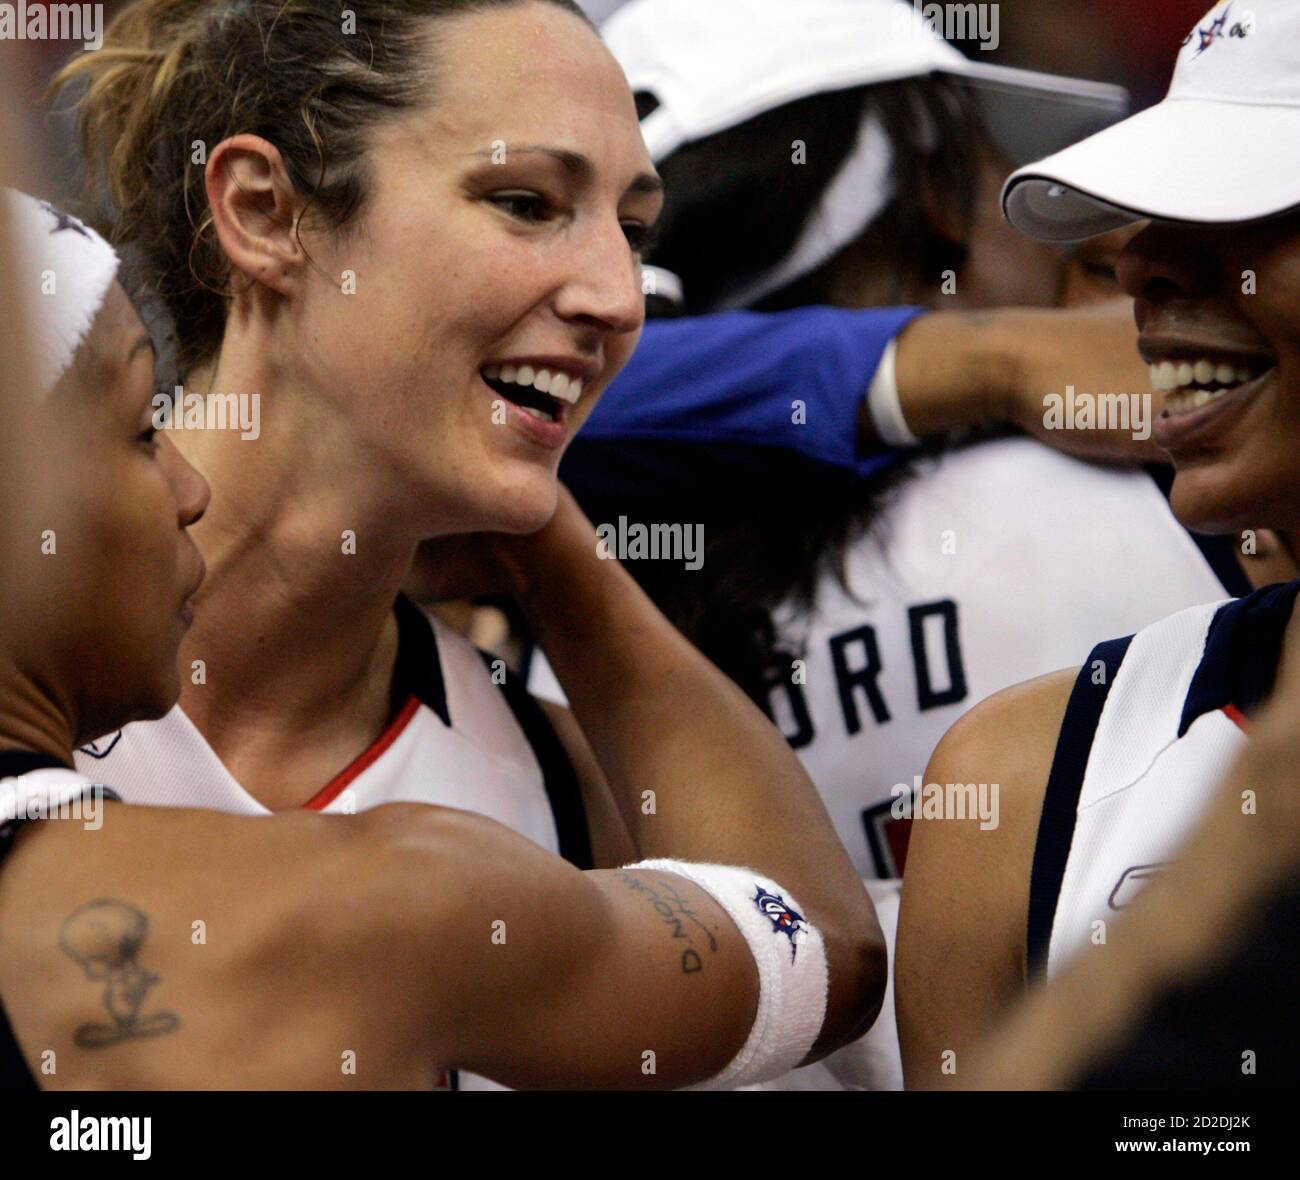 Detroit Shock's Deanna Nolan (L) and Ruth Riley (C) celebrate after Game 5  of their WNBA Finals against the Sacramento Monarchs at Joe Louis Arena in  Detroit, Michigan September 9, 2006. The